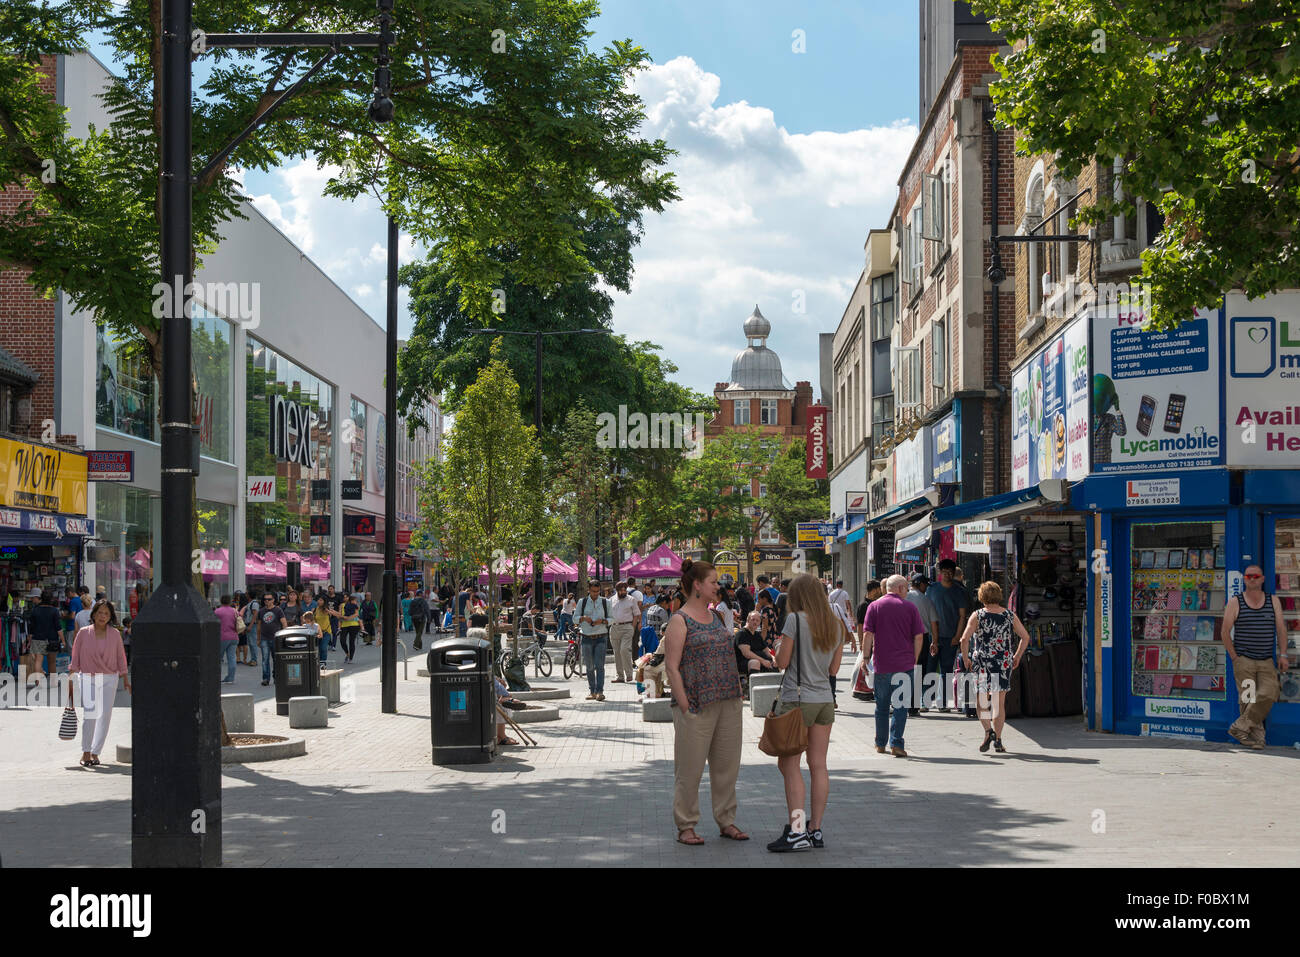 High Street, Hounslow, Hounslow, London, Greater London, Angleterre, Royaume-Uni Banque D'Images